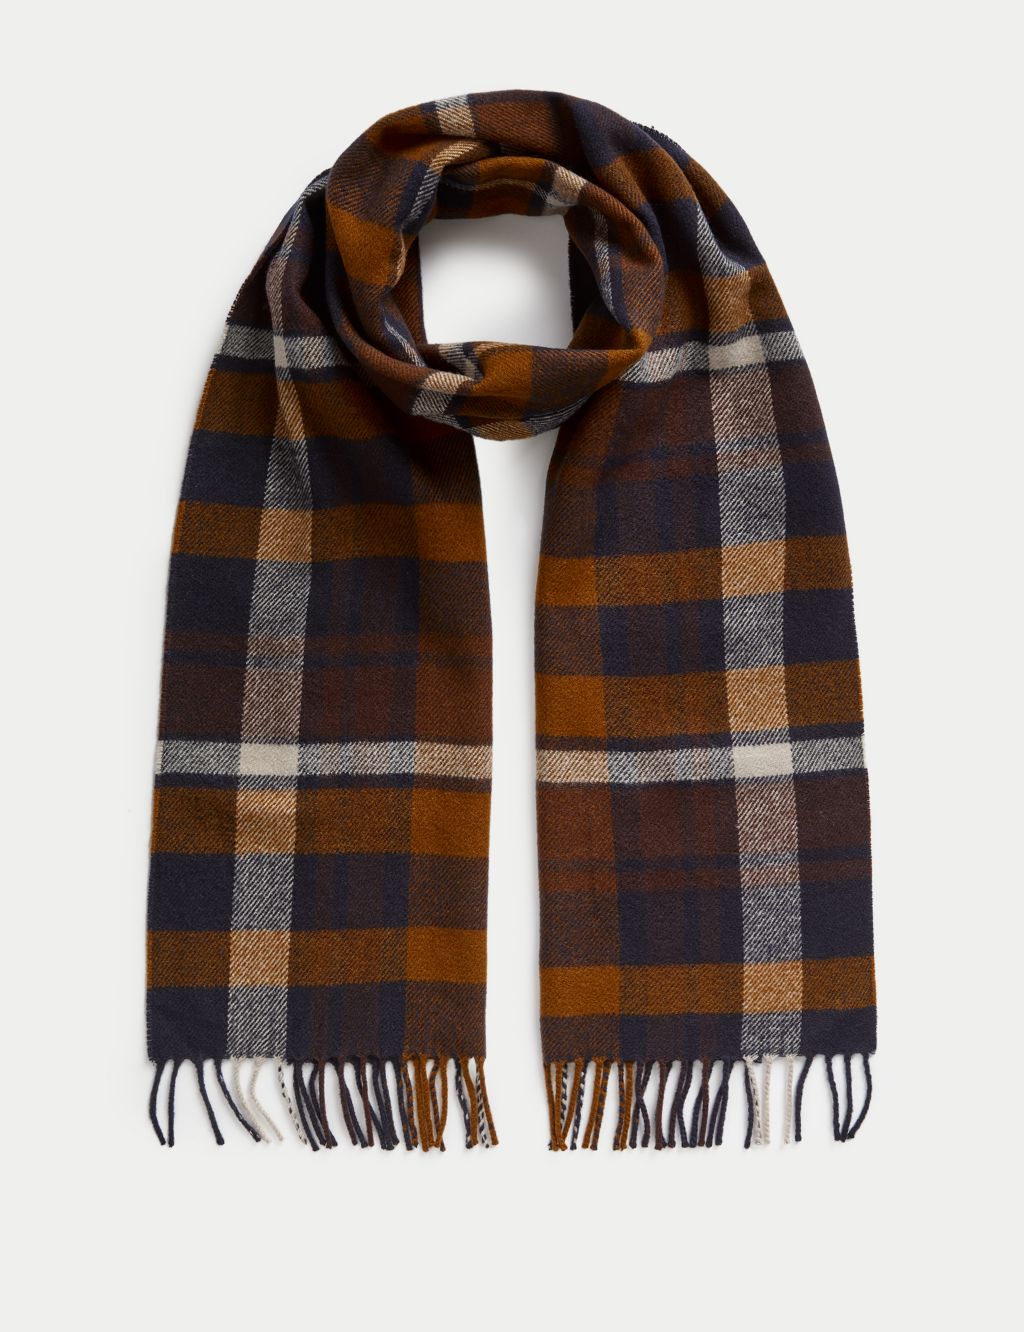 Checked Woven Scarf image 1